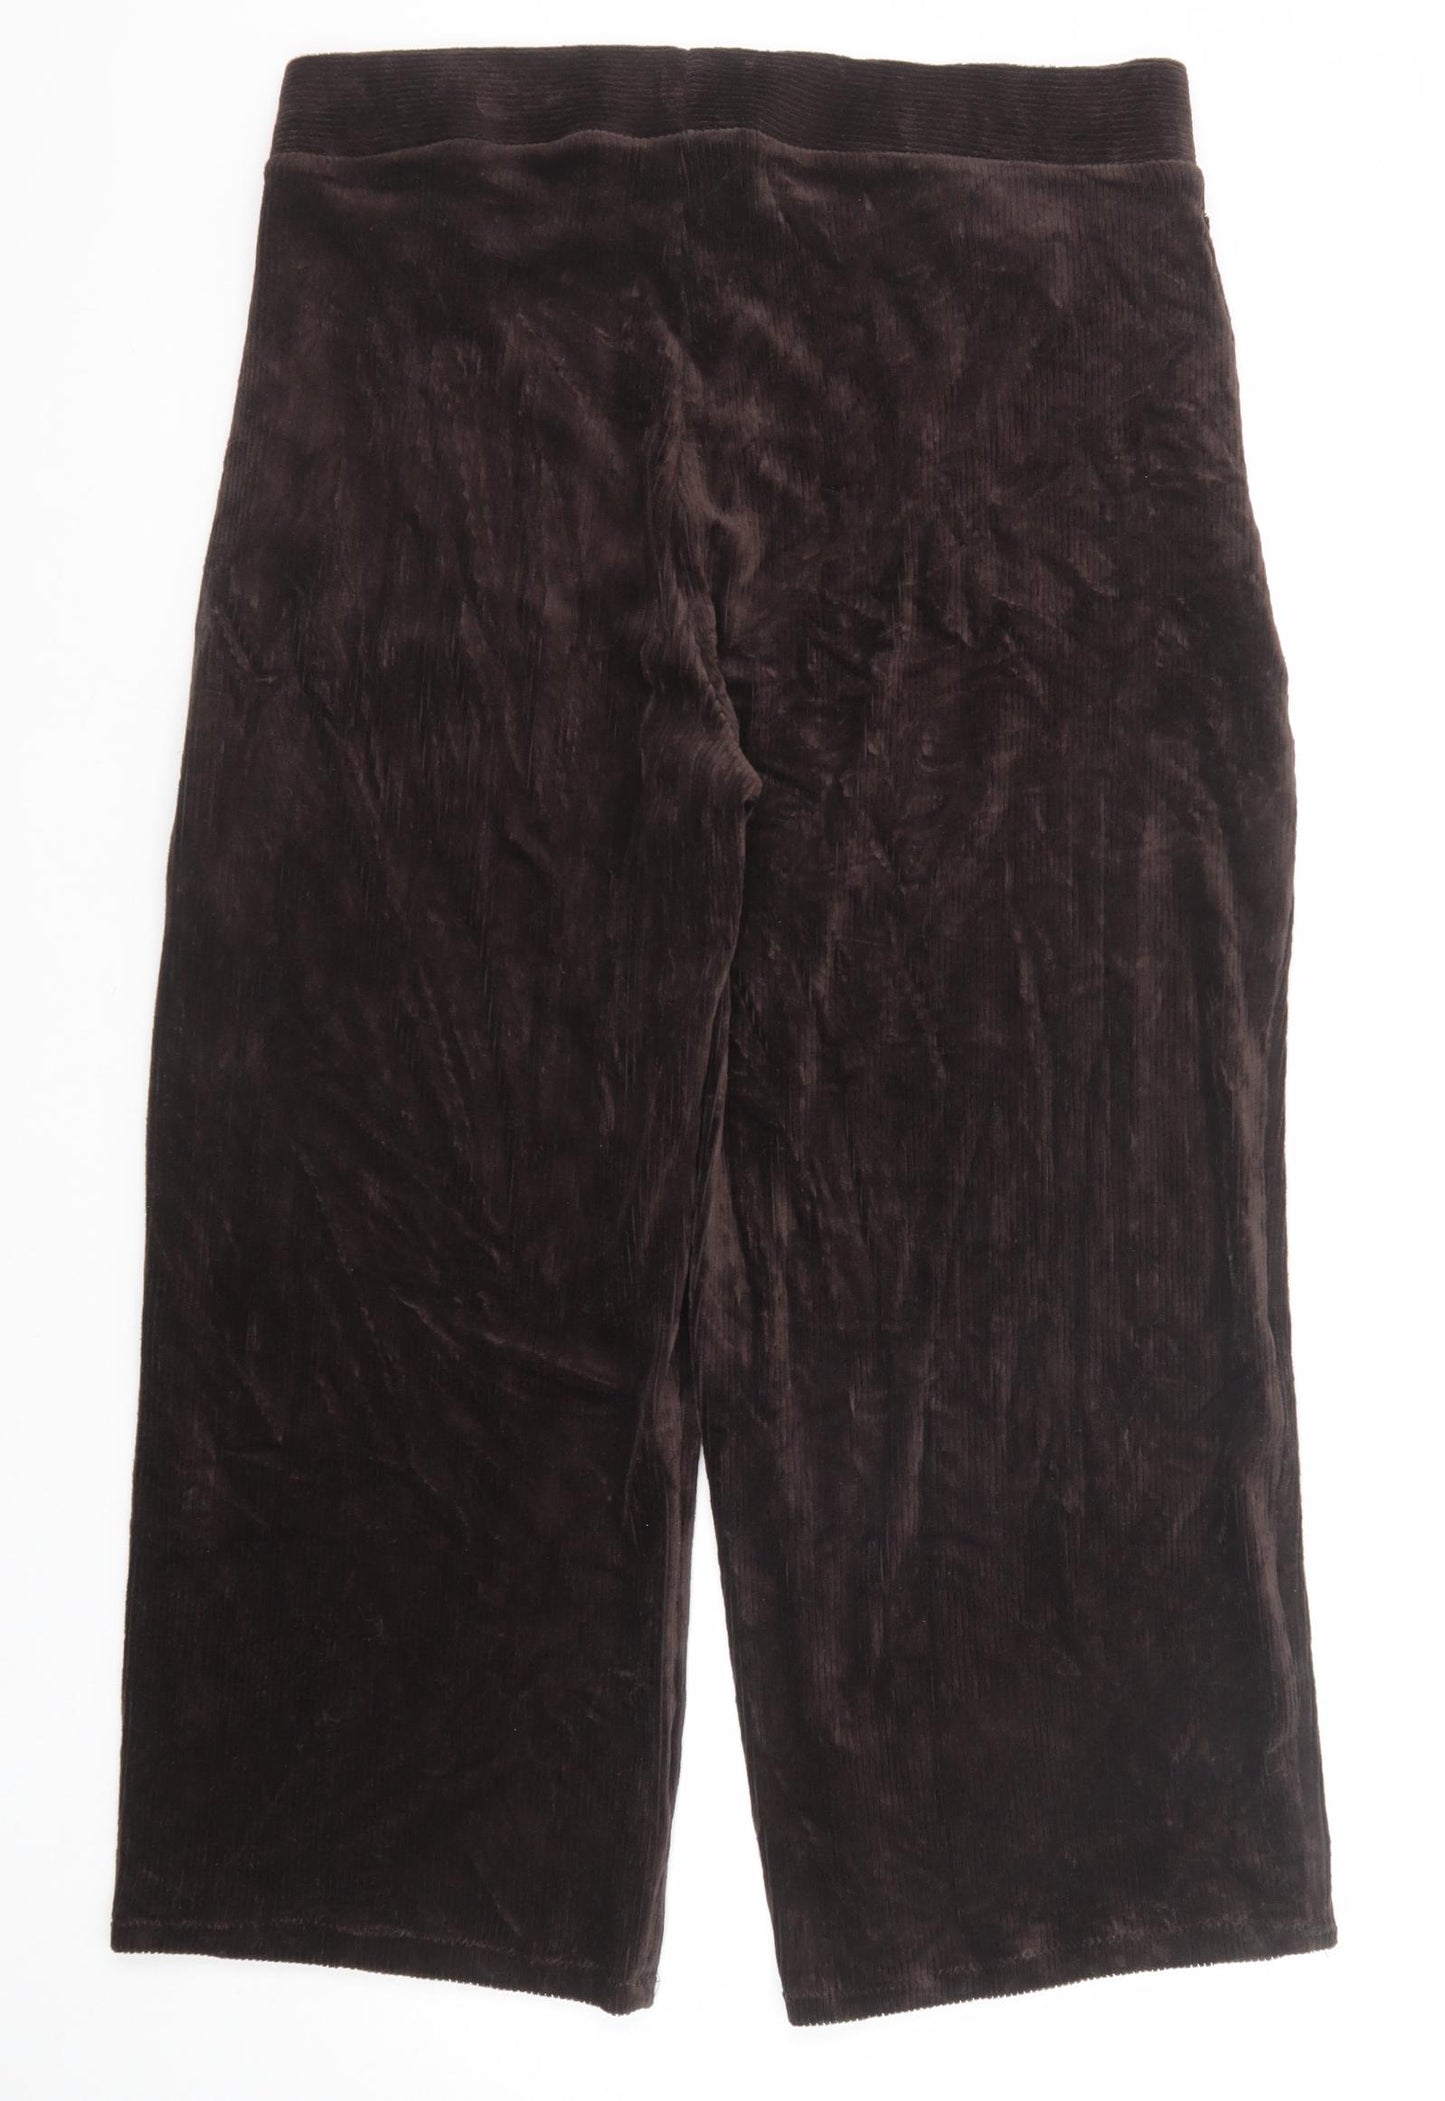 Marks and Spencer Womens Brown Cotton Trousers Size 18 Regular Zip